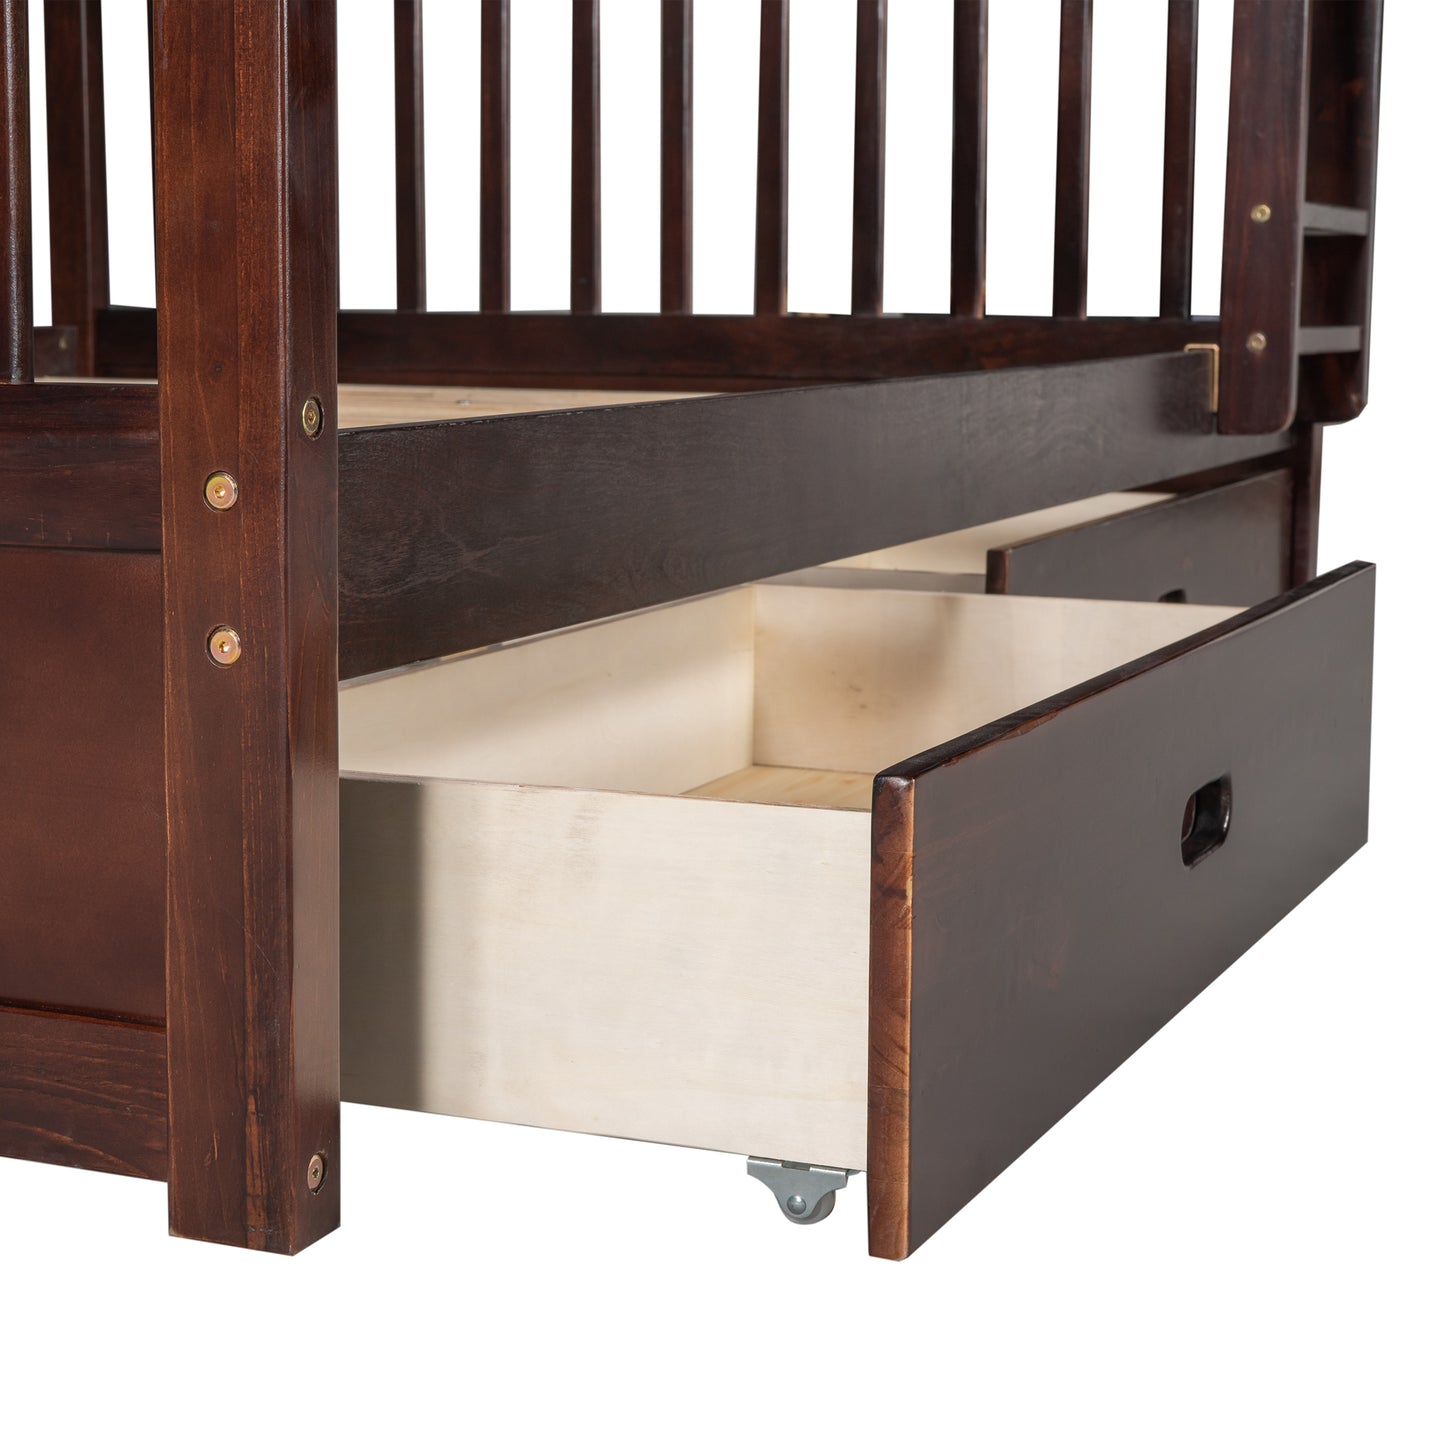 Full-Over-Full Bunk Bed with Ladders and Two Storage Drawers Espresso